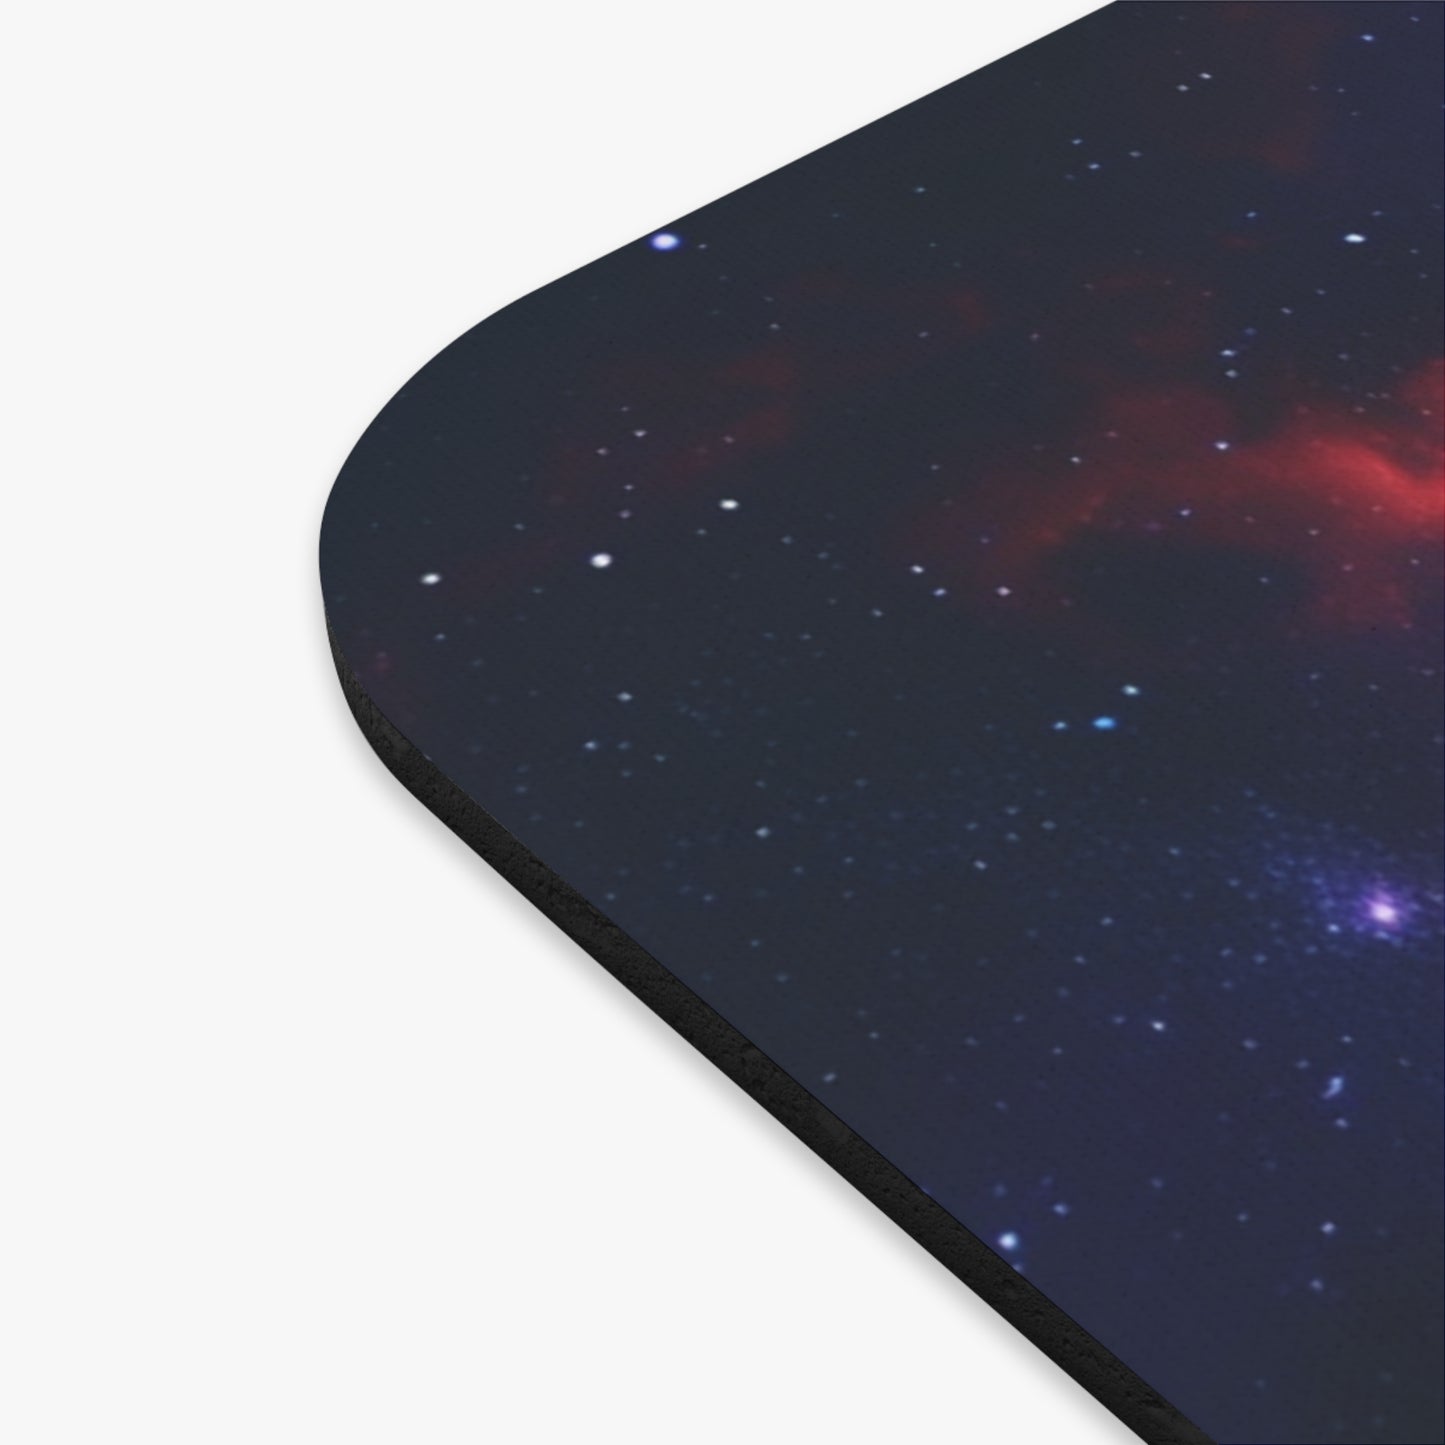 Mouse Pad (Rectangle) - Now Or Never